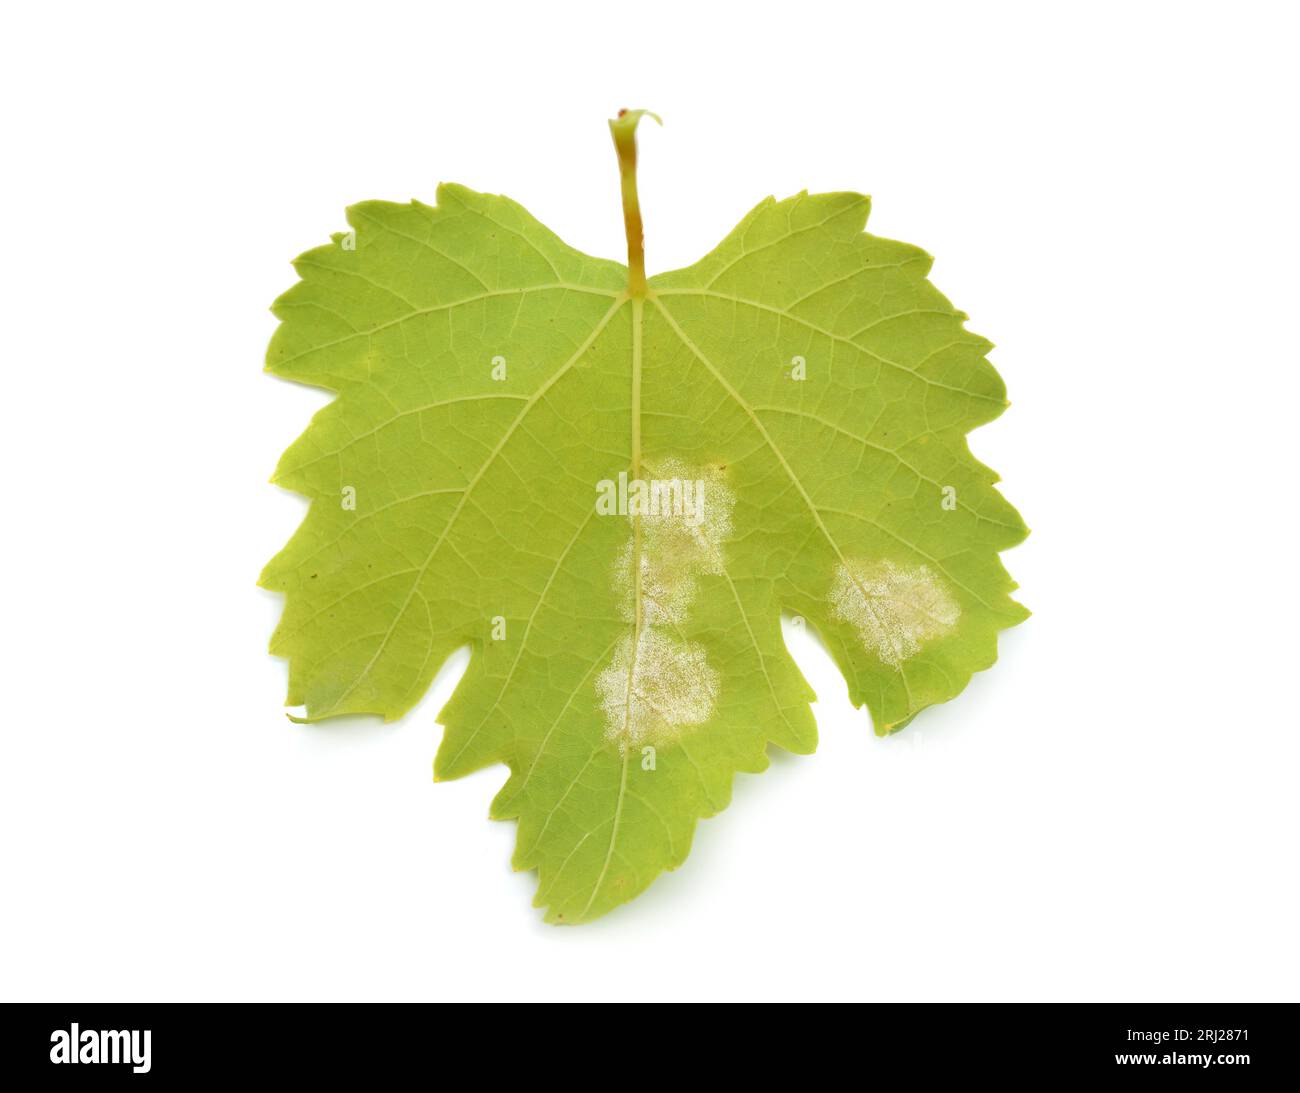 Downy mildew on a grape leaf. Isolated on white background Stock Photo